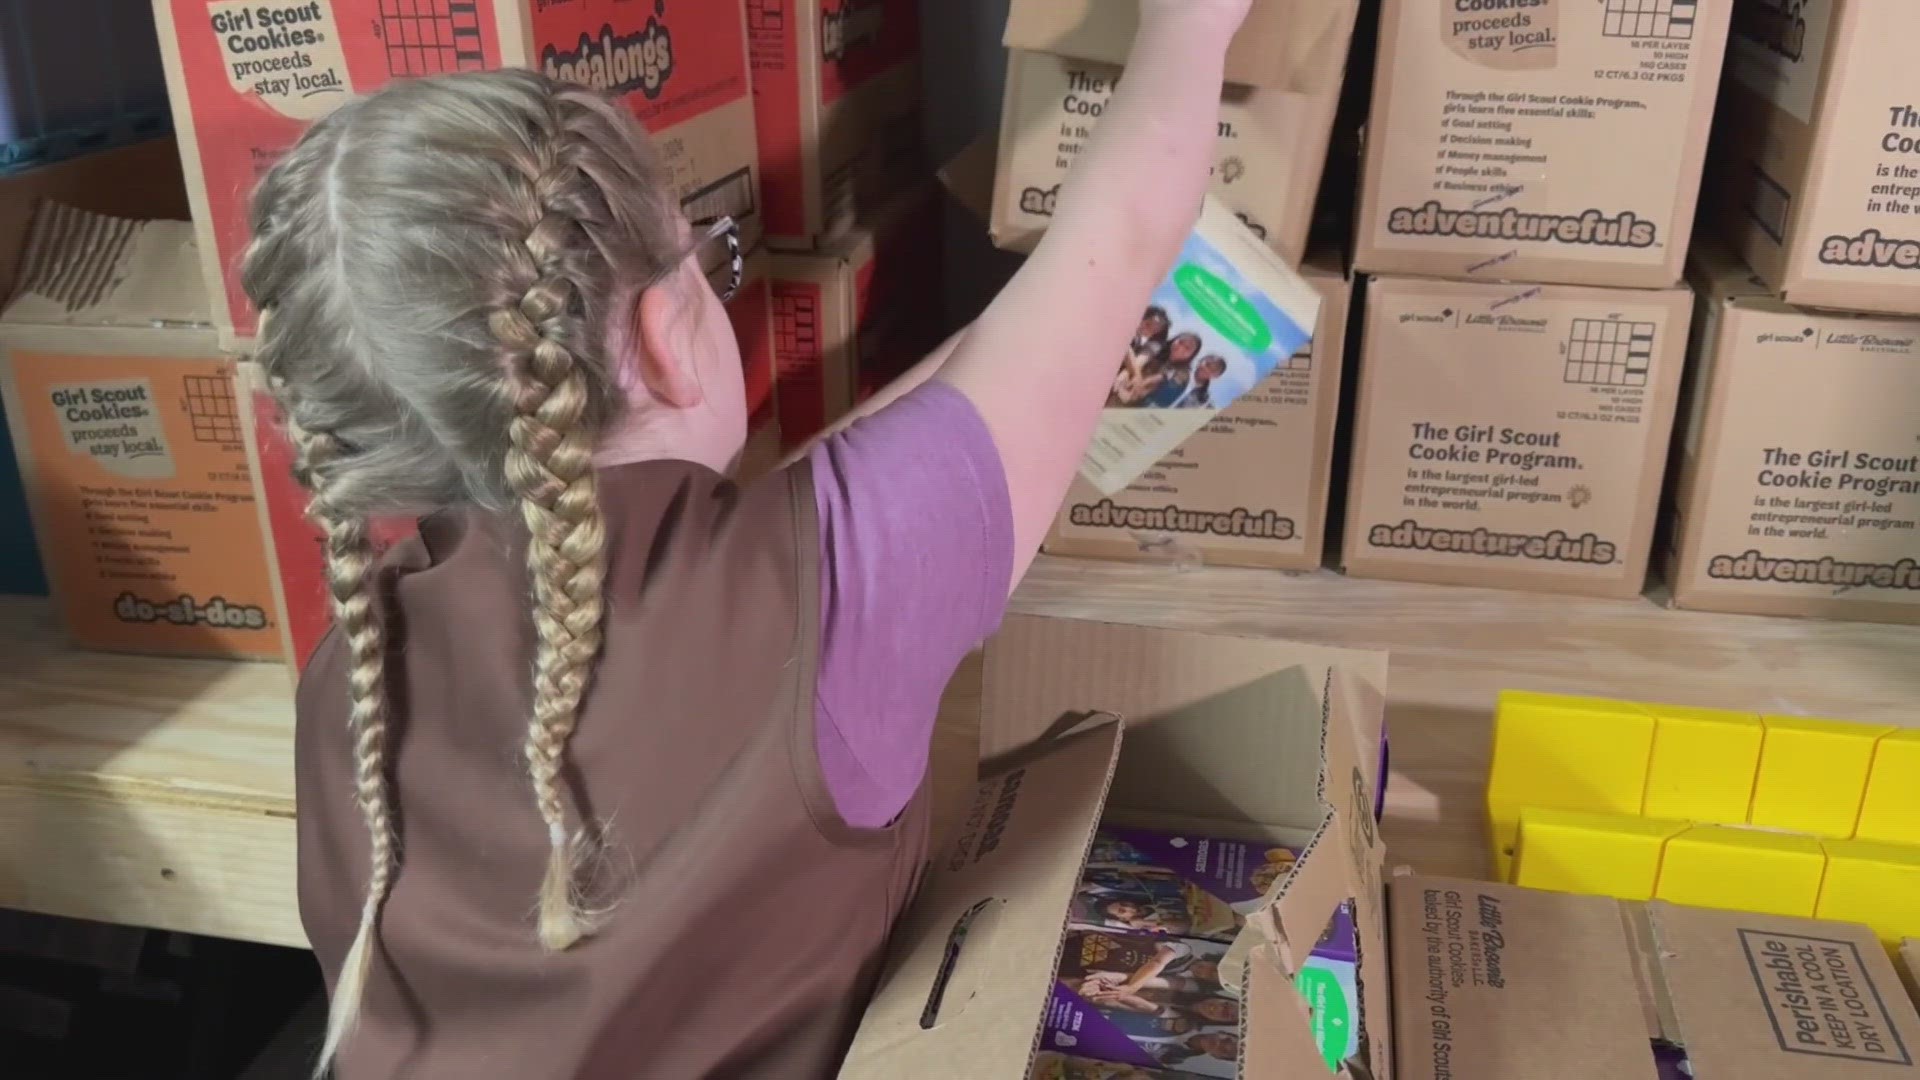 Fortunately, the community came together to help out Girl Scout Troop 2175.